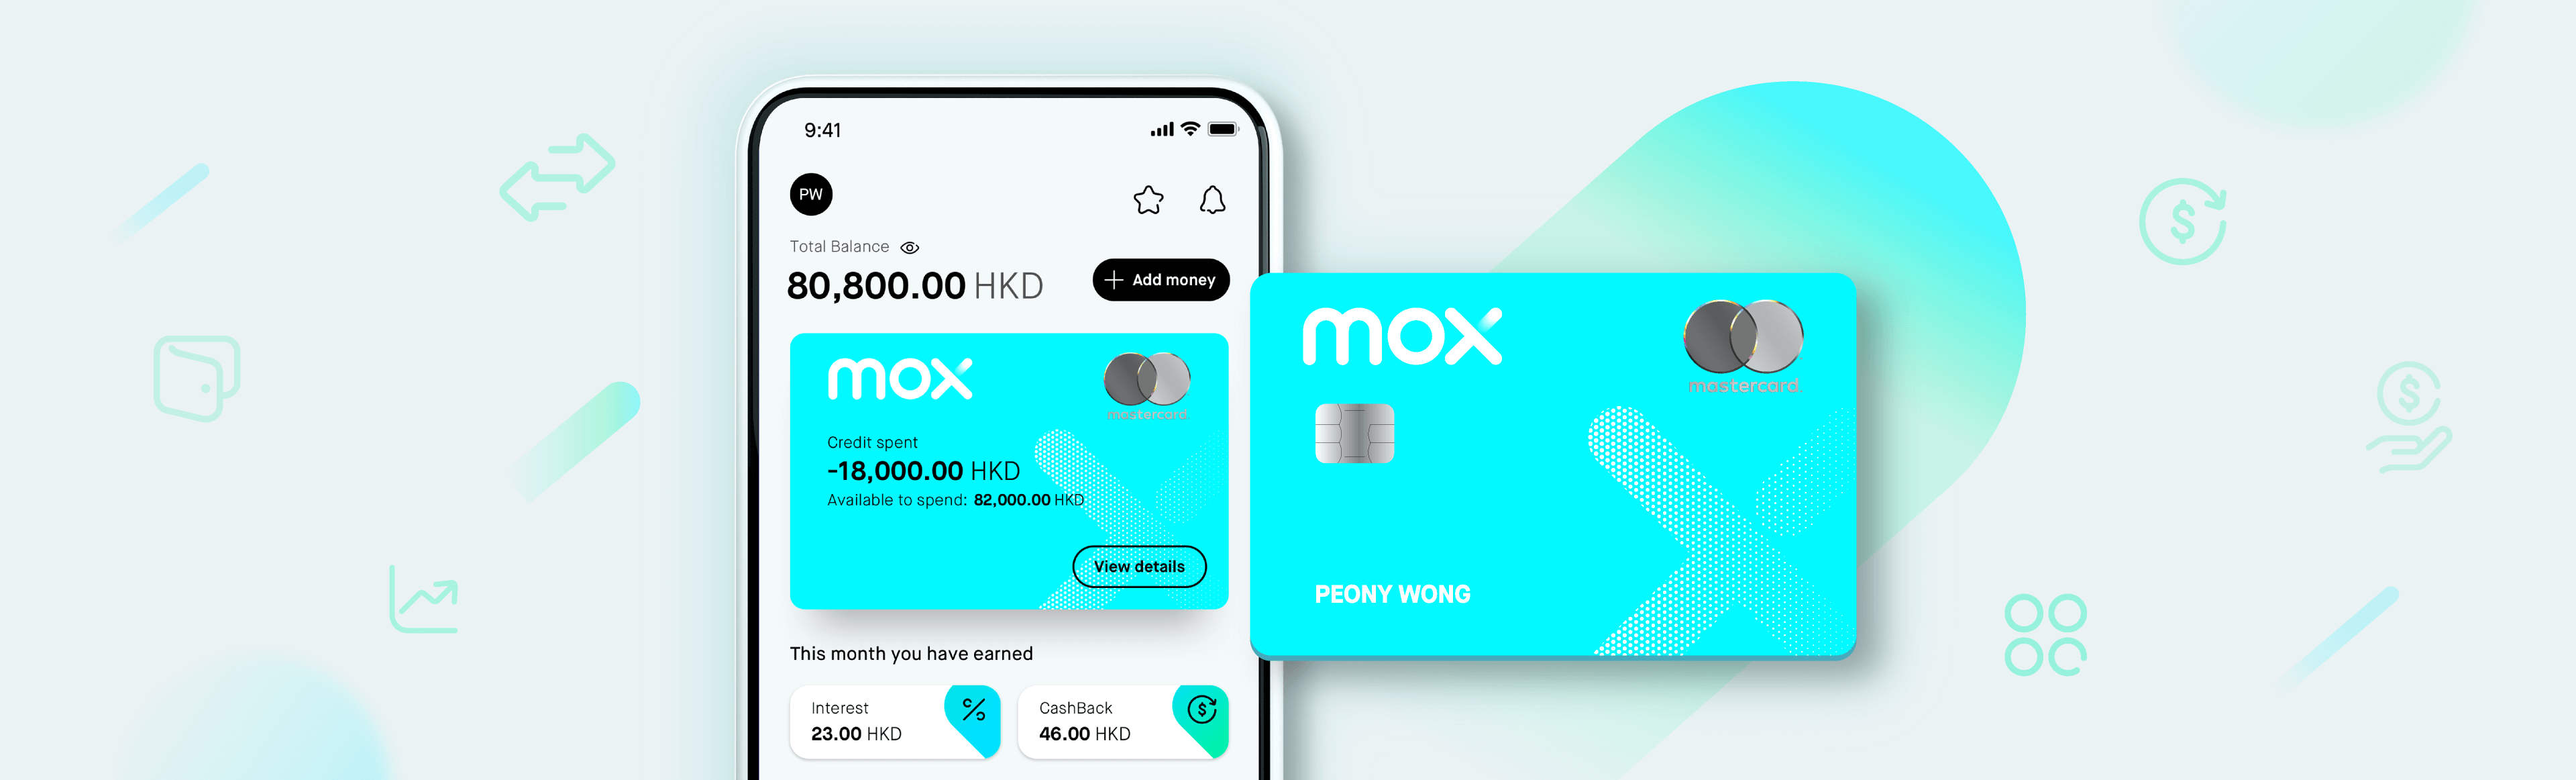 Mox embraces Open Banking